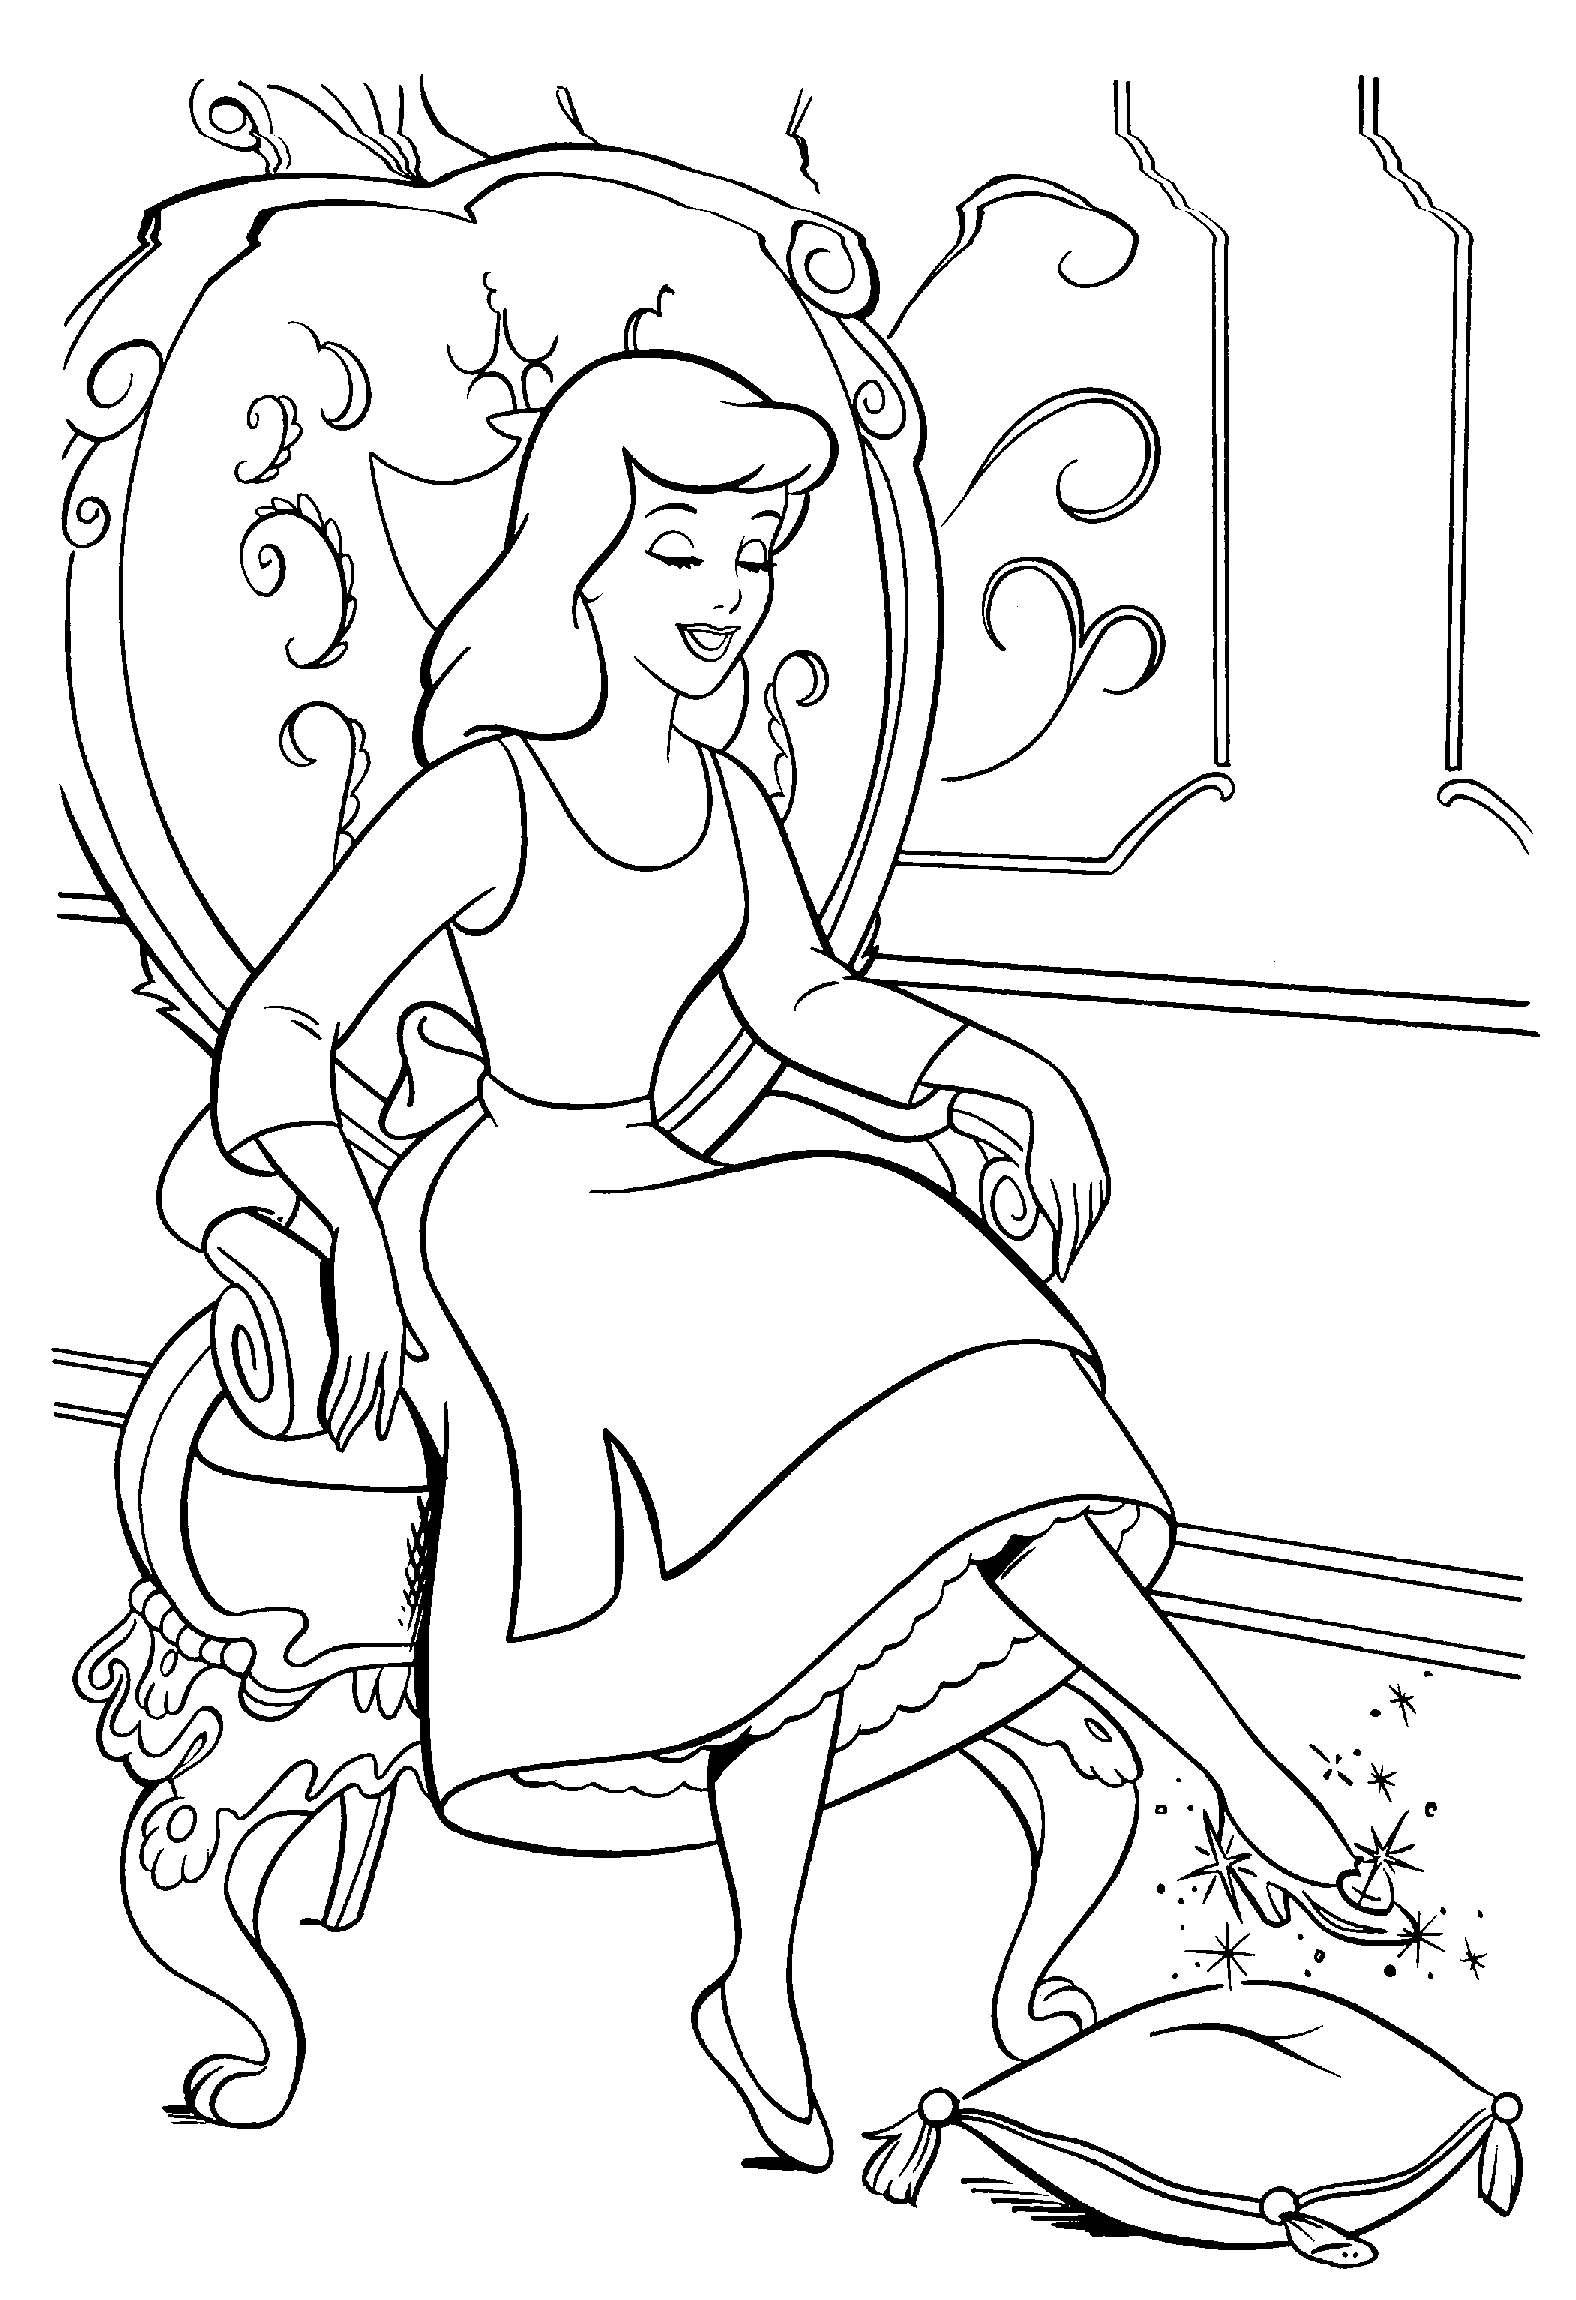 cinderella-princess-coloring-pages-for-kids-printable-free